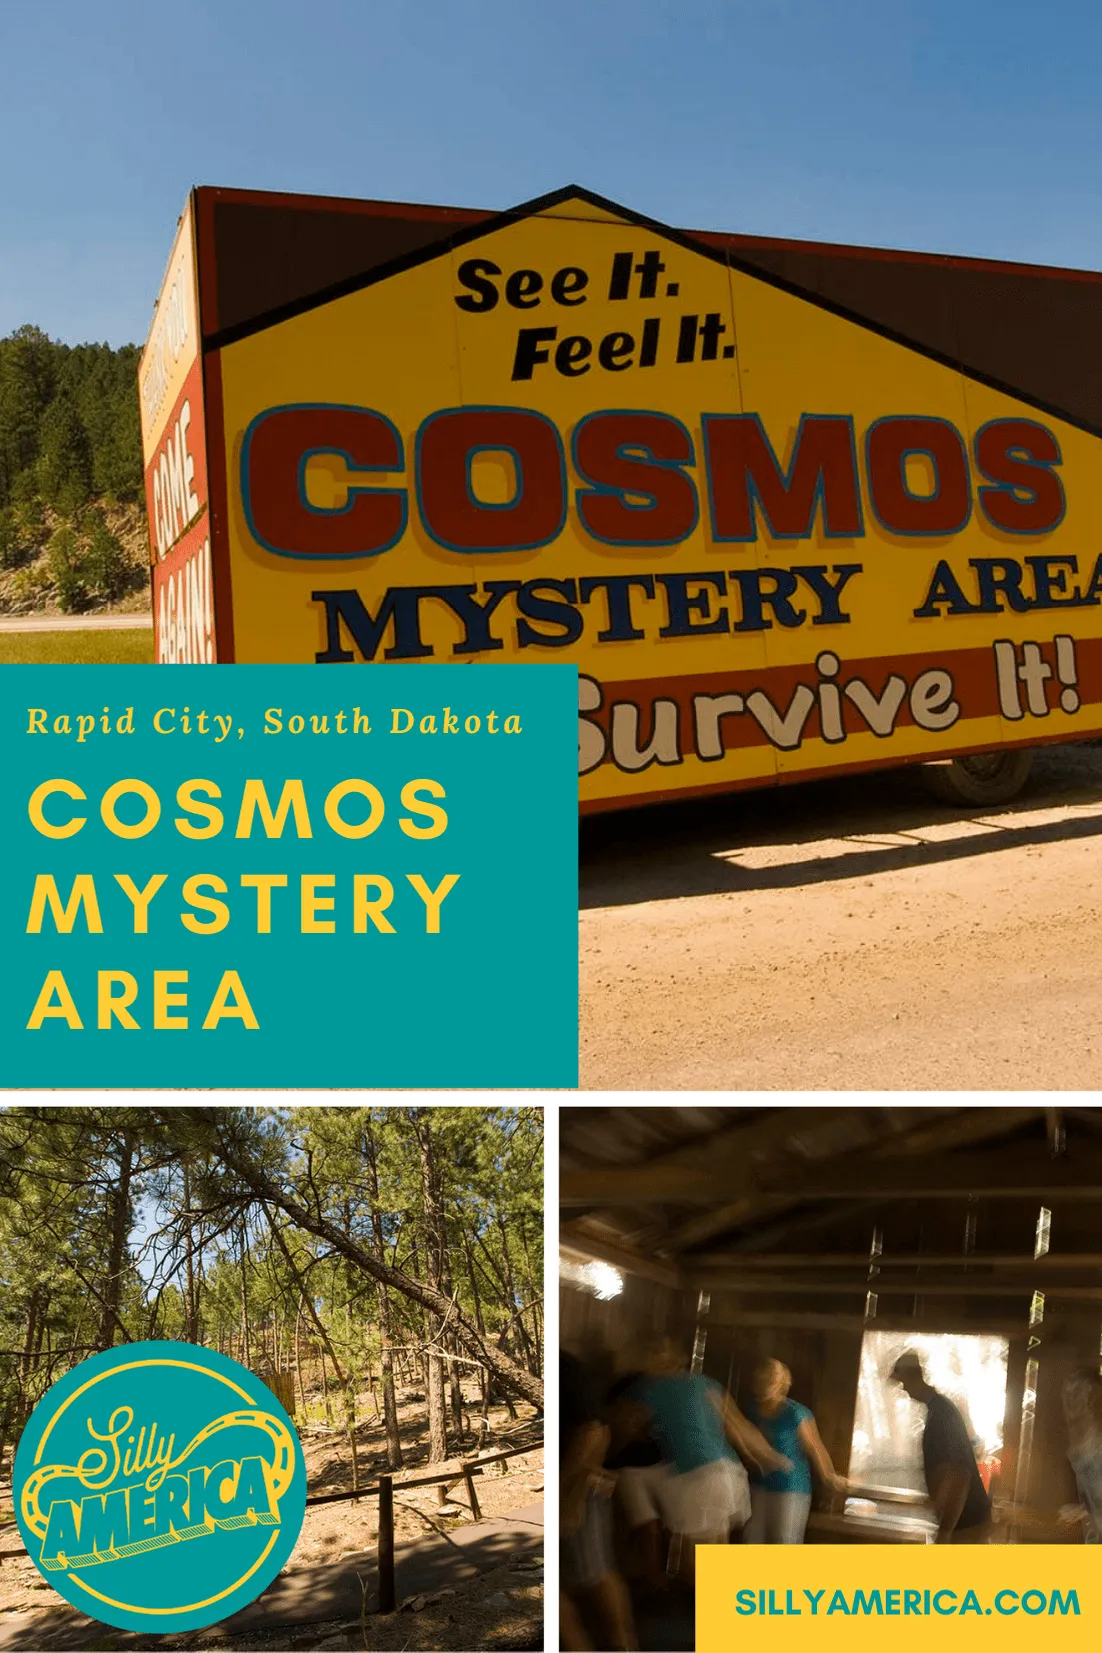 Cosmos Mystery Area in Rapid City, South Dakota is a phenomenon of a place where gravity and the laws of nature go out the window. Watch water flow and balls roll up a ledge. Switch places with a friend and magically grow. Walk dizzily through a house not knowing up from down. Stand sideways on a wall. See it all on a tour of this South Dakota roadside attraction. #SouthDakotaRoadsideAttractions #SouthDakotaRoadsideAttraction #RoadsideAttractions #RoadsideAttraction  #SouthDakotaRoadTrip